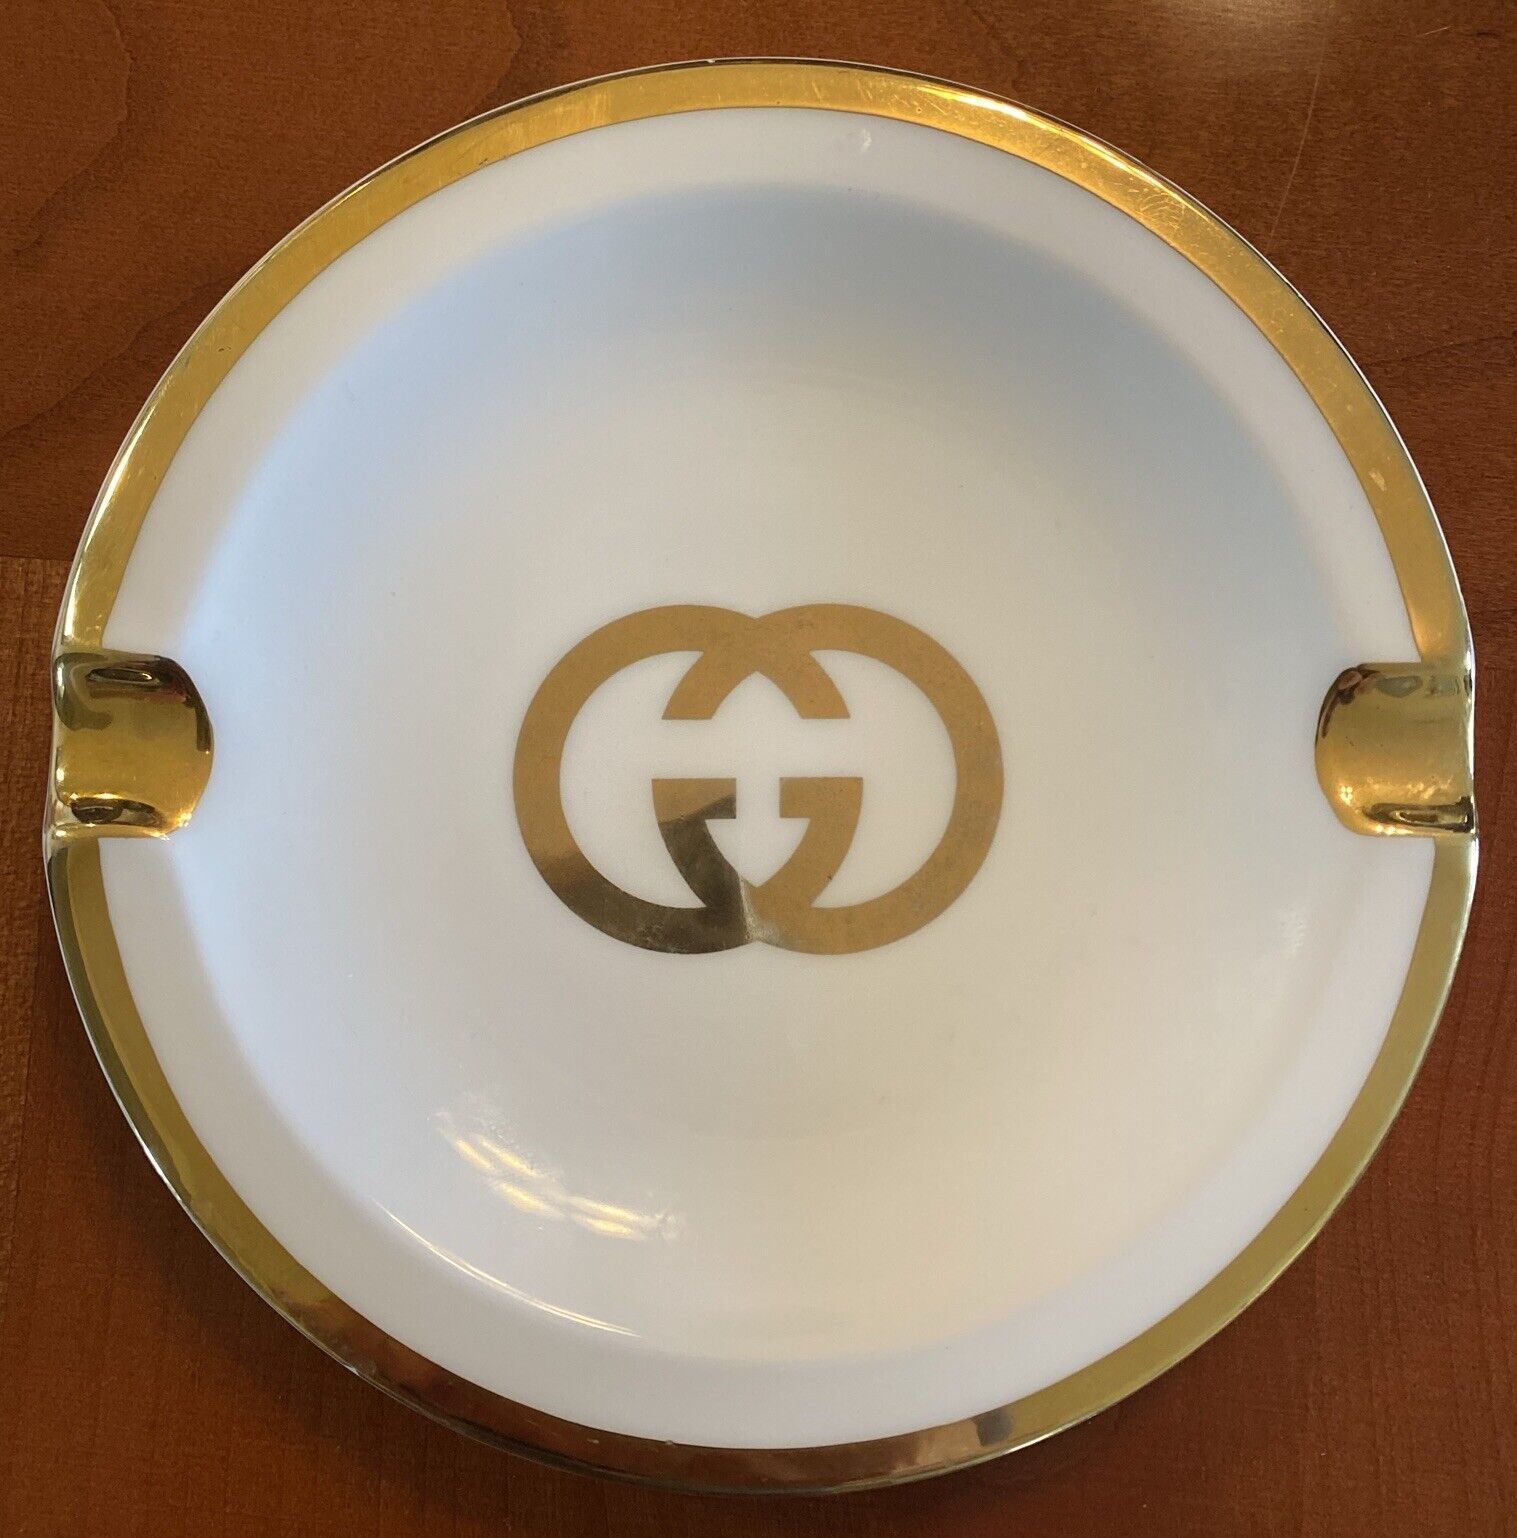 RARE GUCCI Ivory Ashtray with Iconic Gold Leaf Double GG Design Vintage 1970s 5”